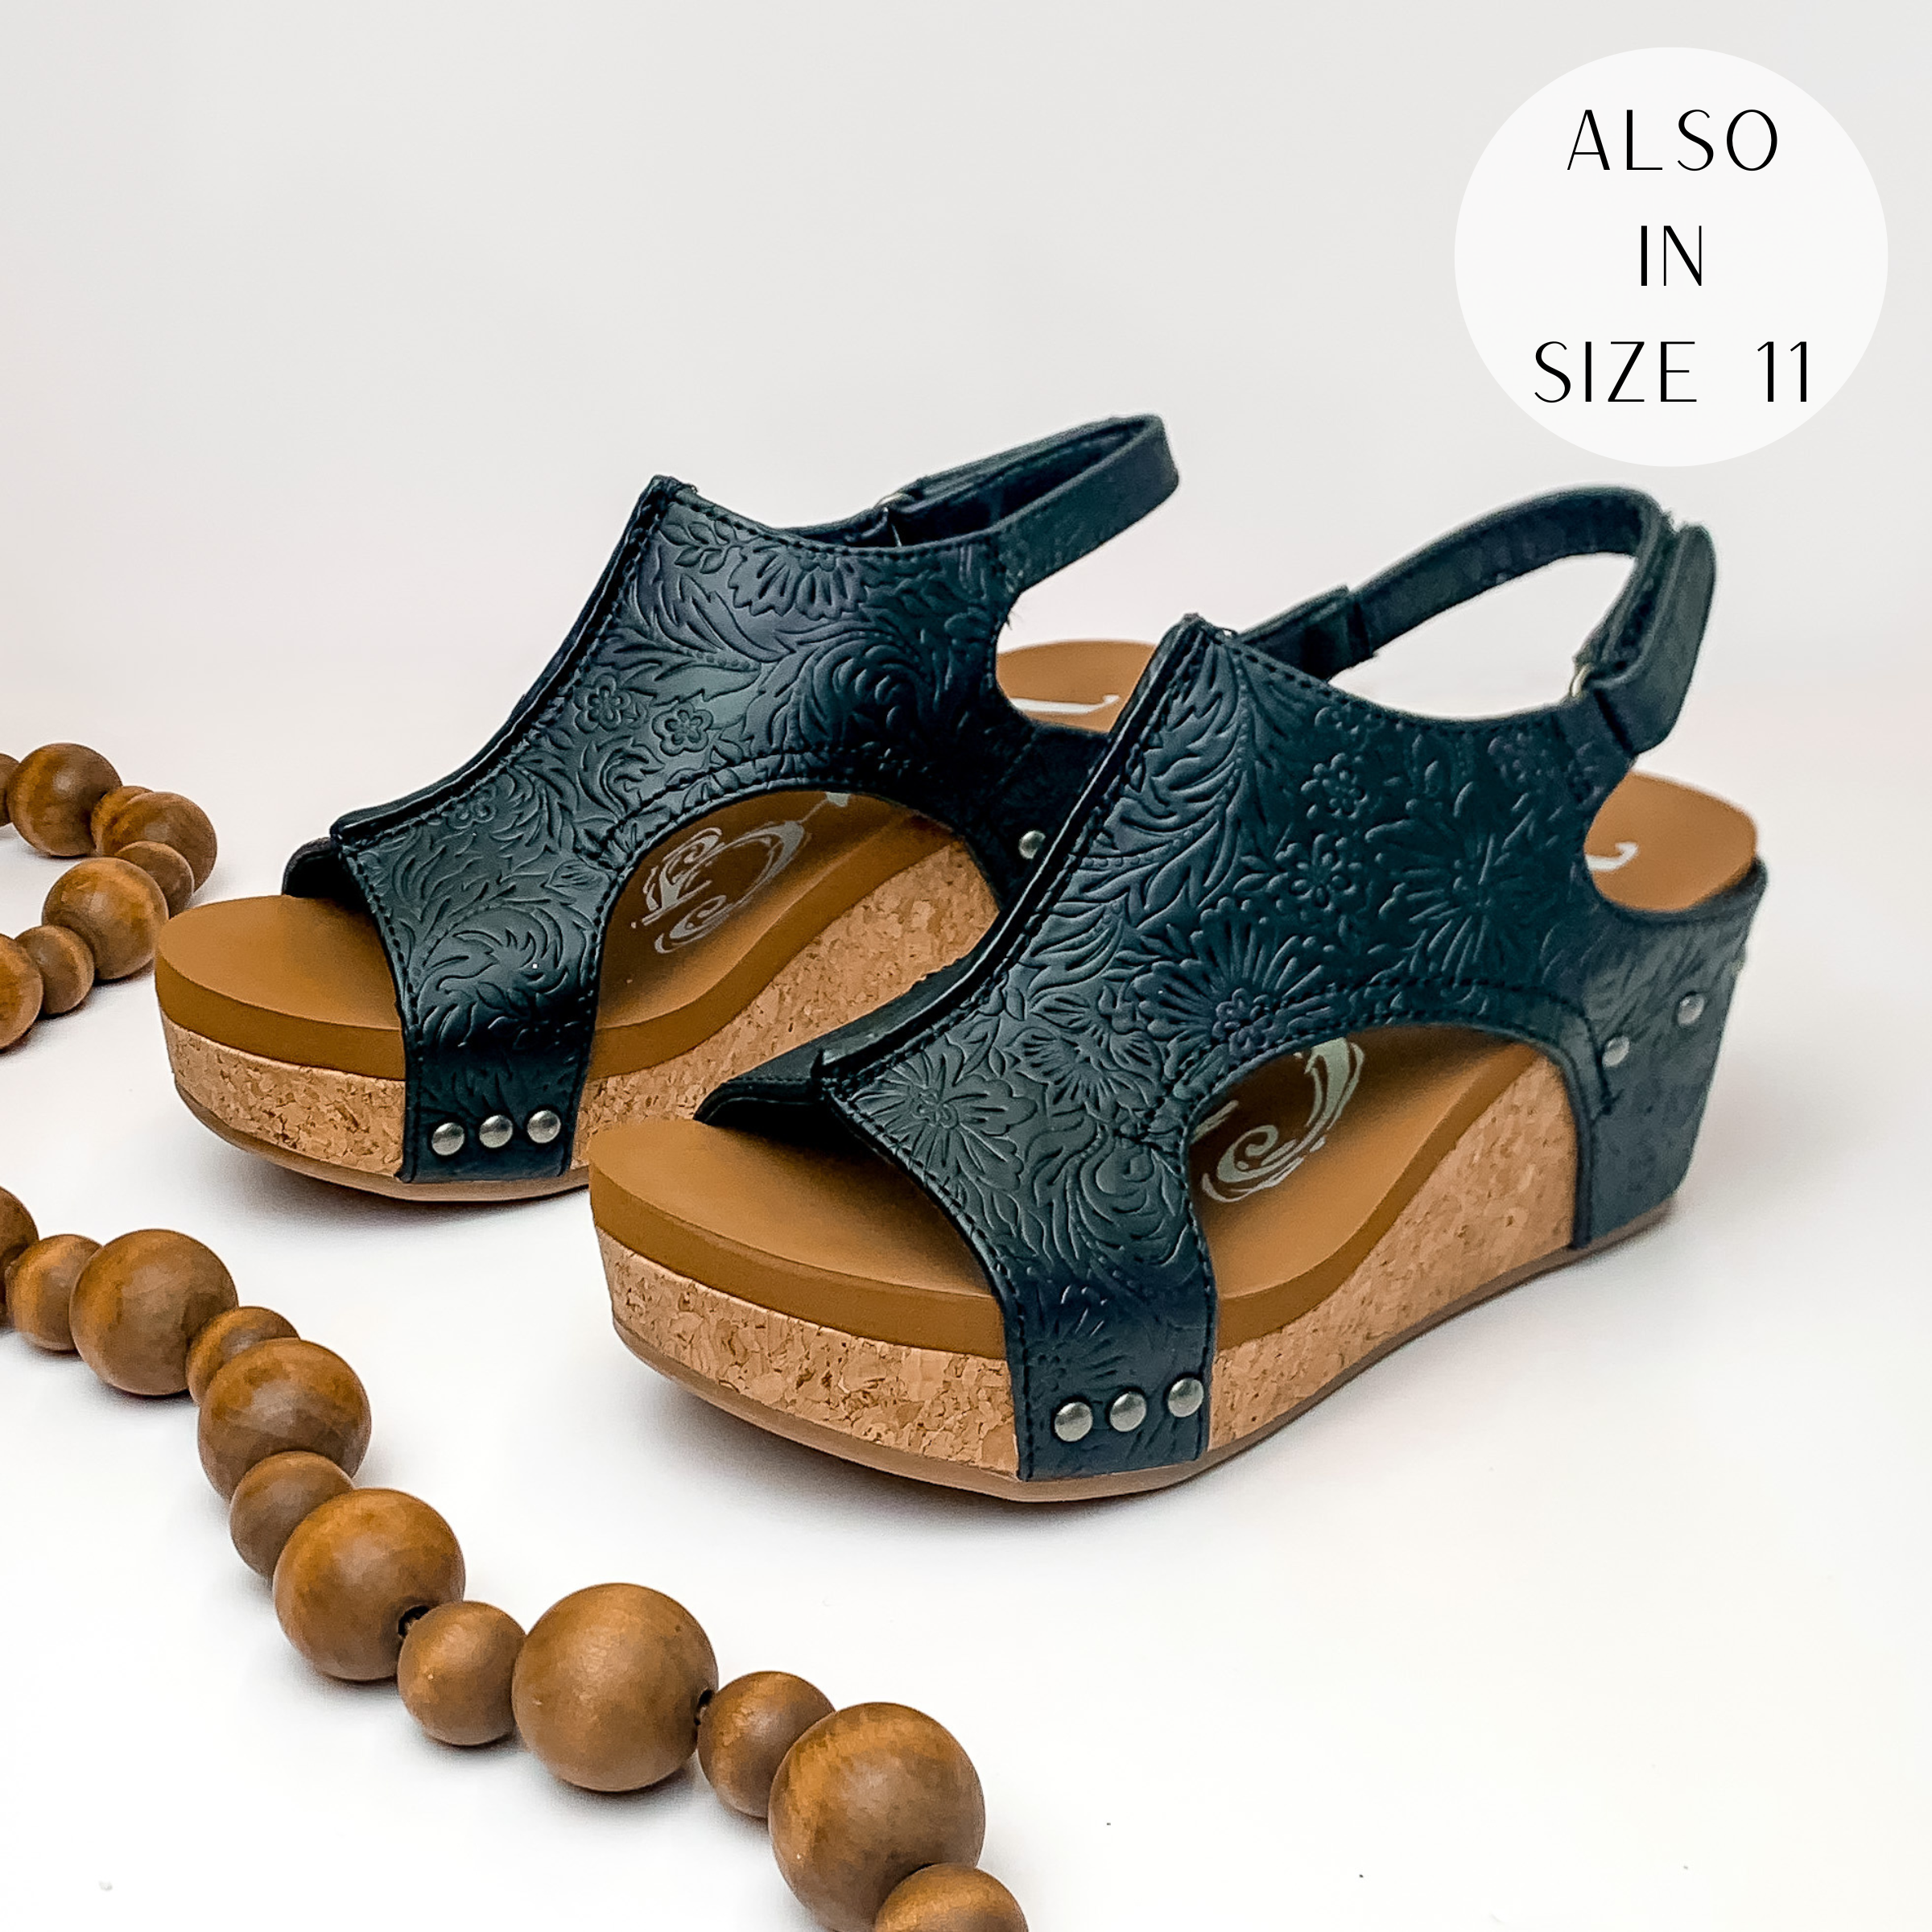 Black, leather tooled cork wedge sandals. These wedges also include charcoal silver studs and a velcro strap. These wedges are pictured on a white background with brown beads on the left side.